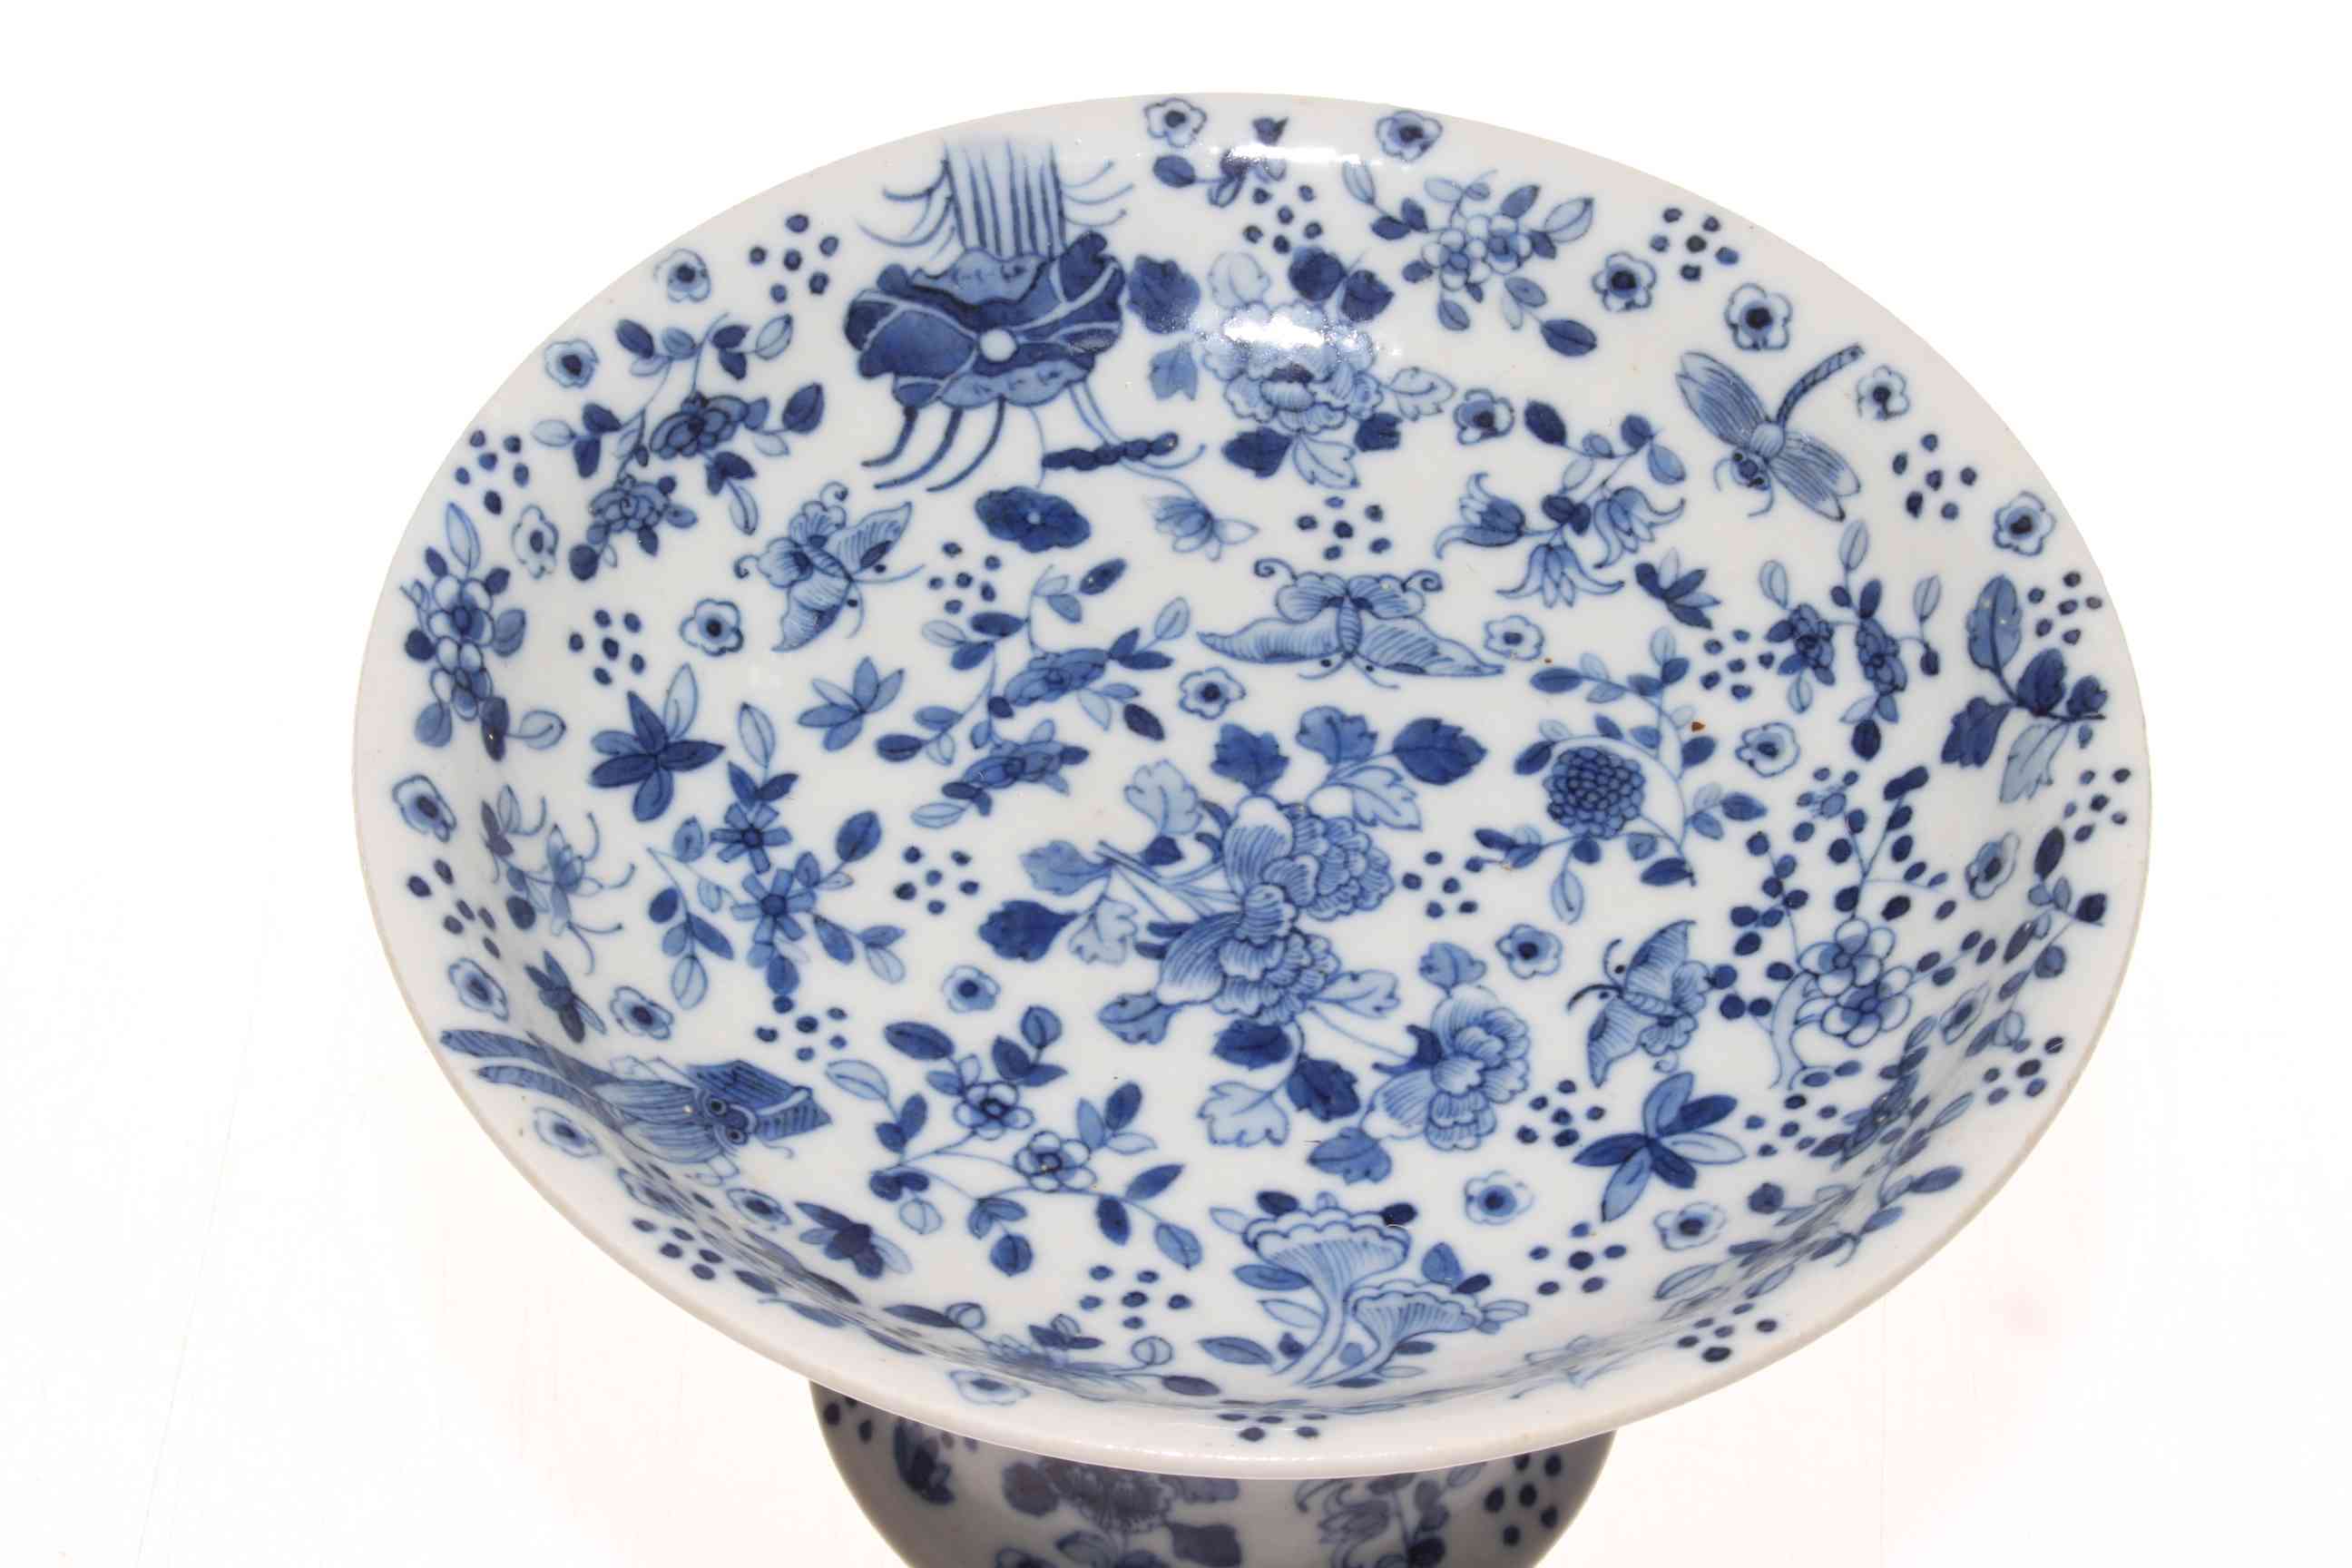 Chinese blue and white tazza with insert and foliage decoration, 14cm high. - Image 2 of 3